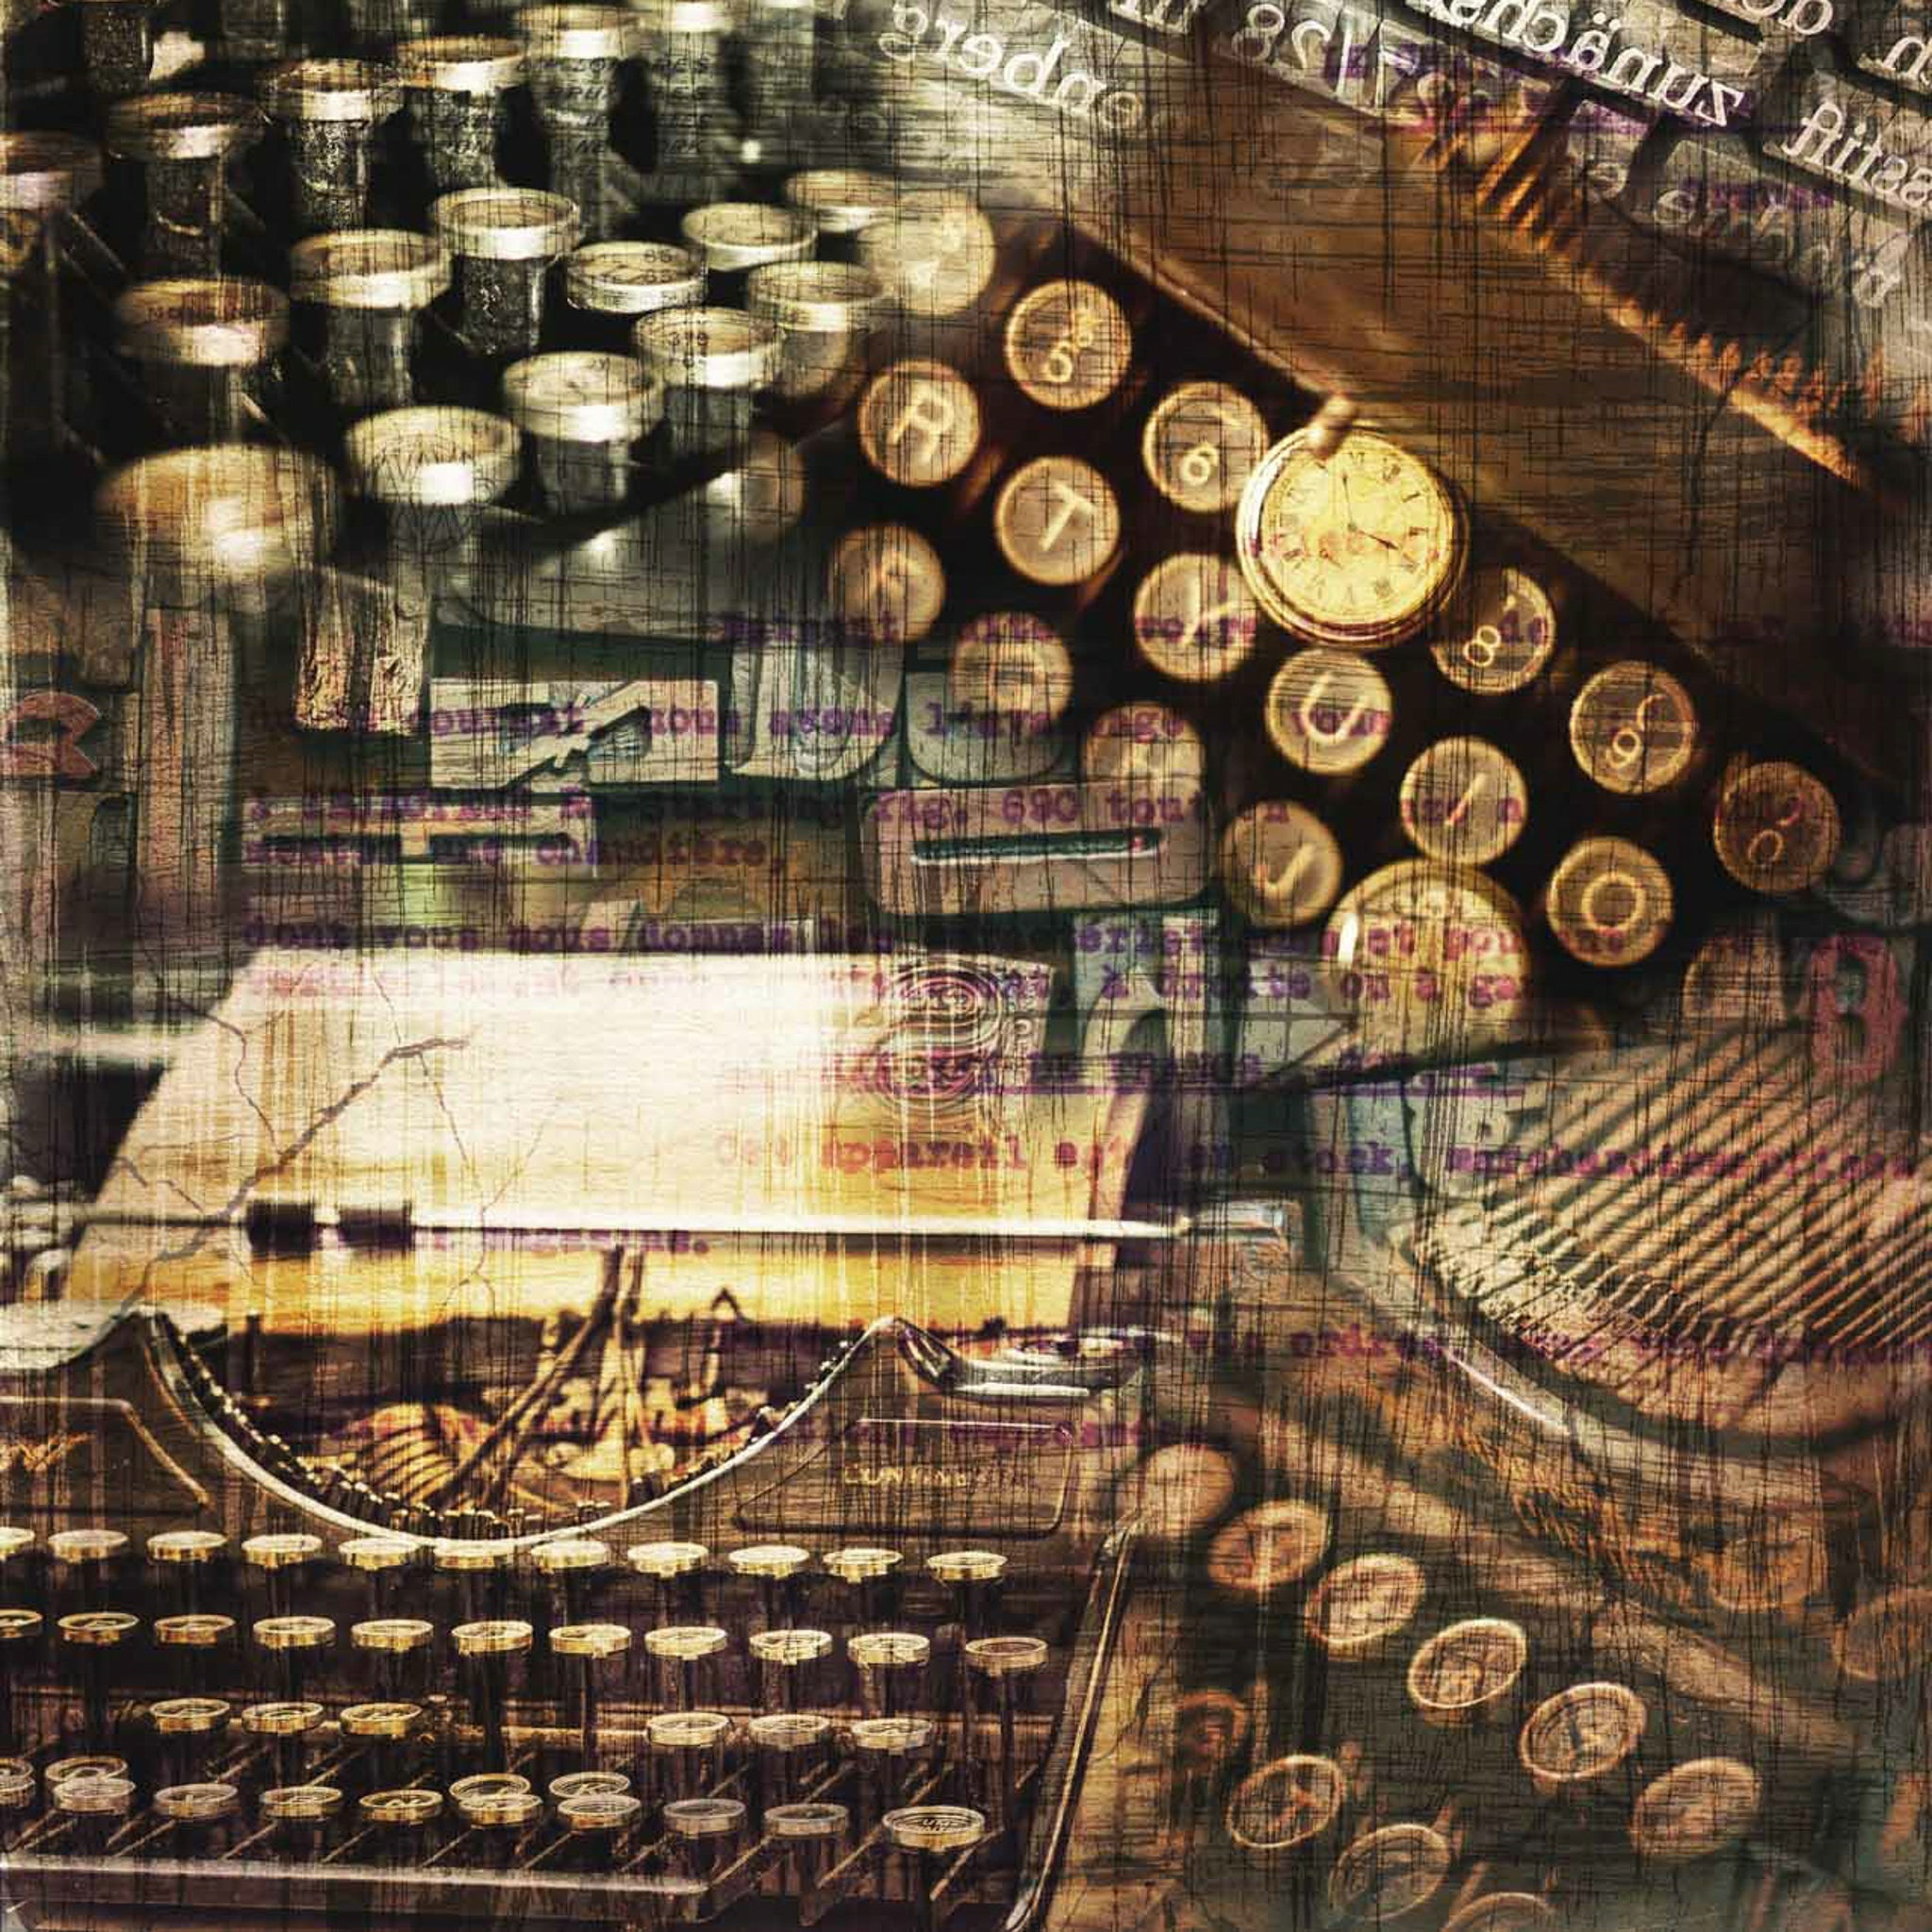 Close-up of a rice paper that features a sepia colored collage of vintage typewriters and letter presses.